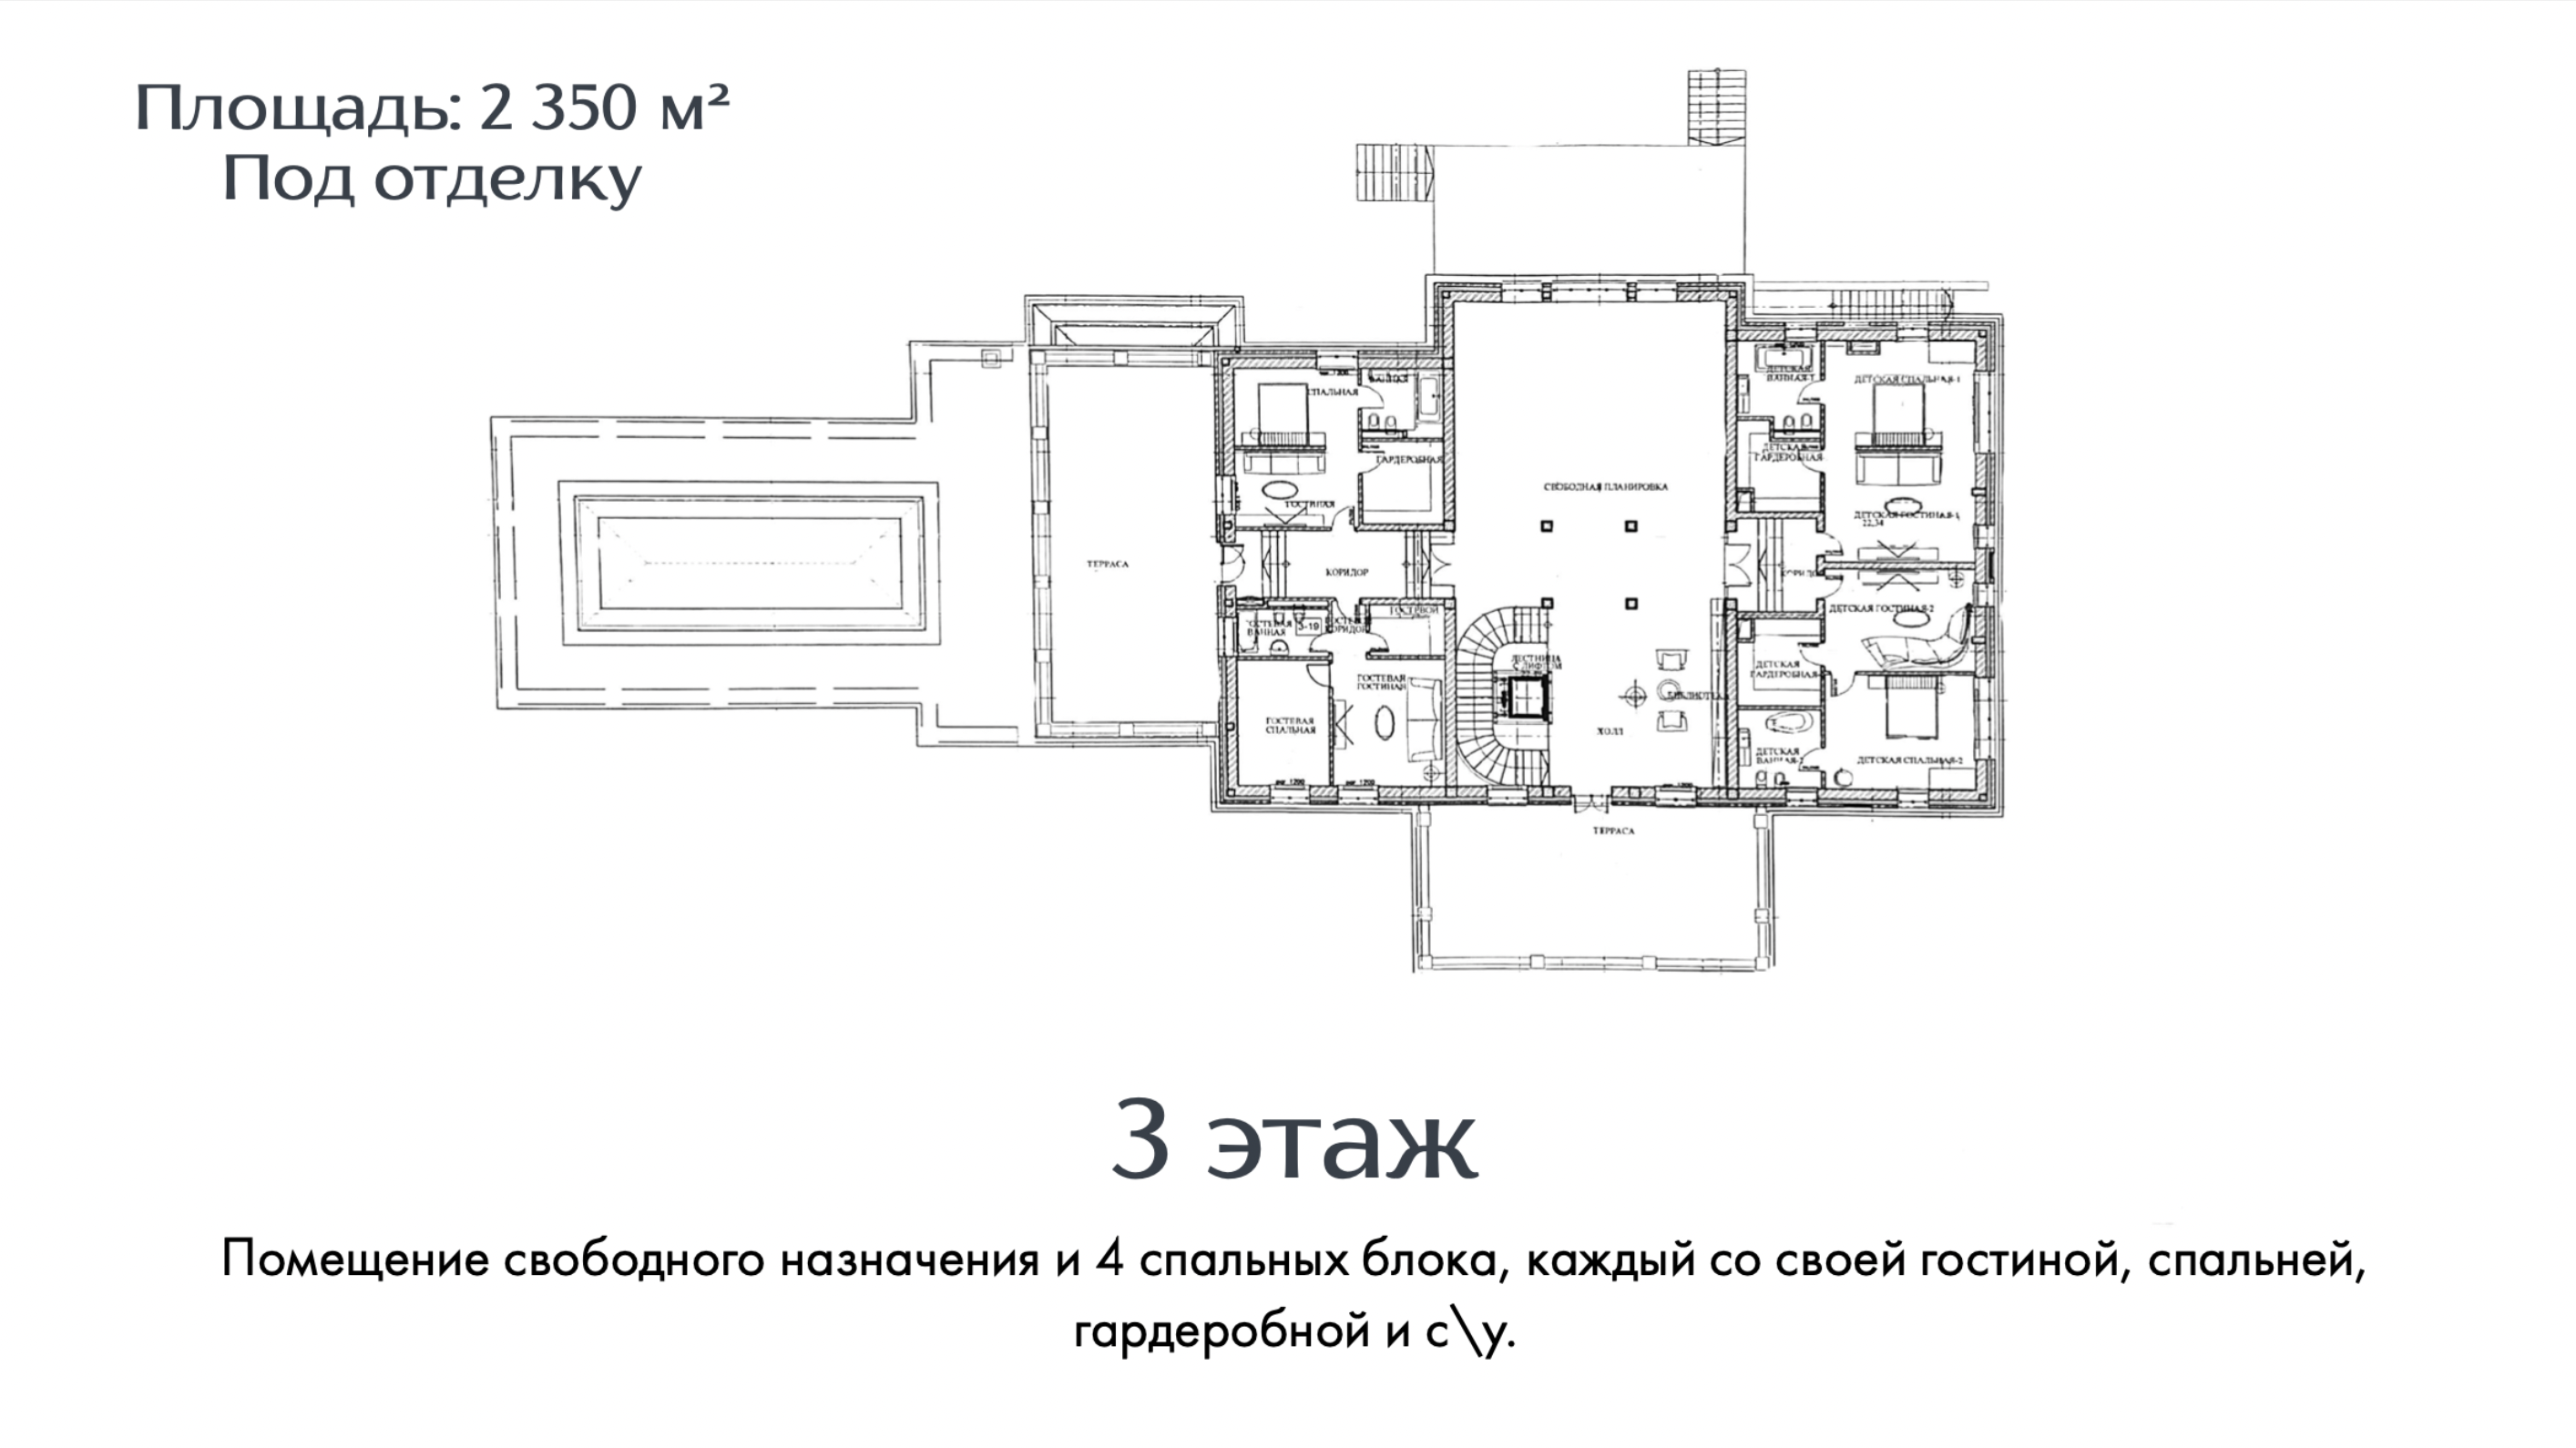 Layout picture Сountry нouse with 8 bedrooms 2350 m2 in village Buzaevo Photo 3